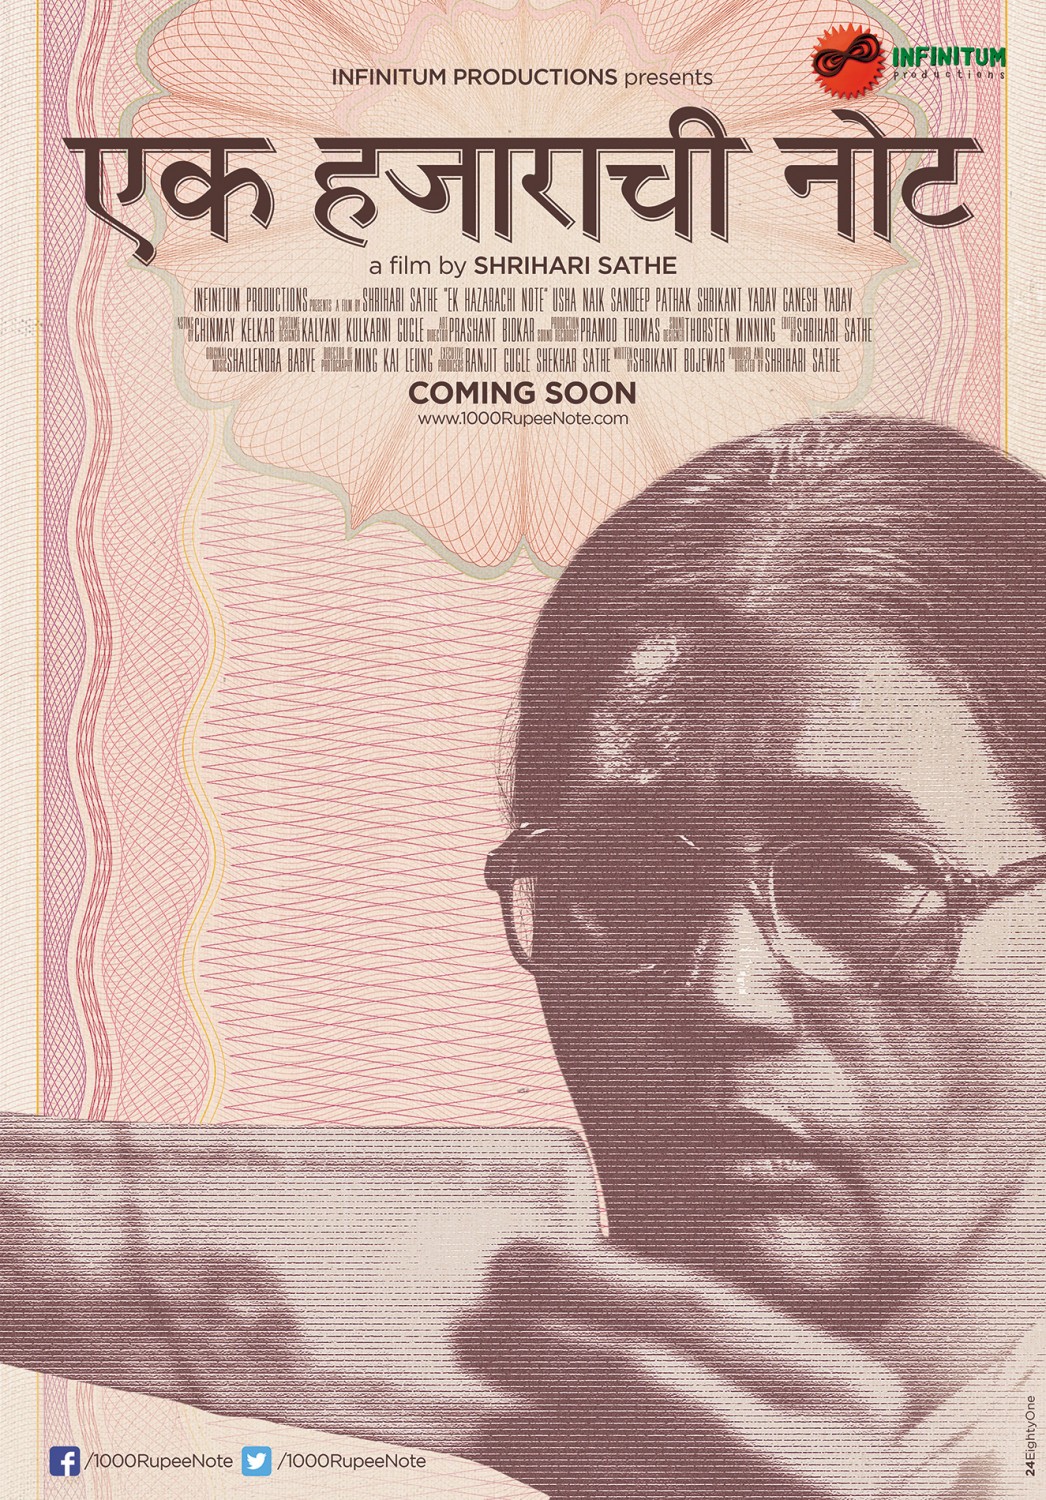 Extra Large Movie Poster Image for 1000 Rupee Note (#2 of 4)